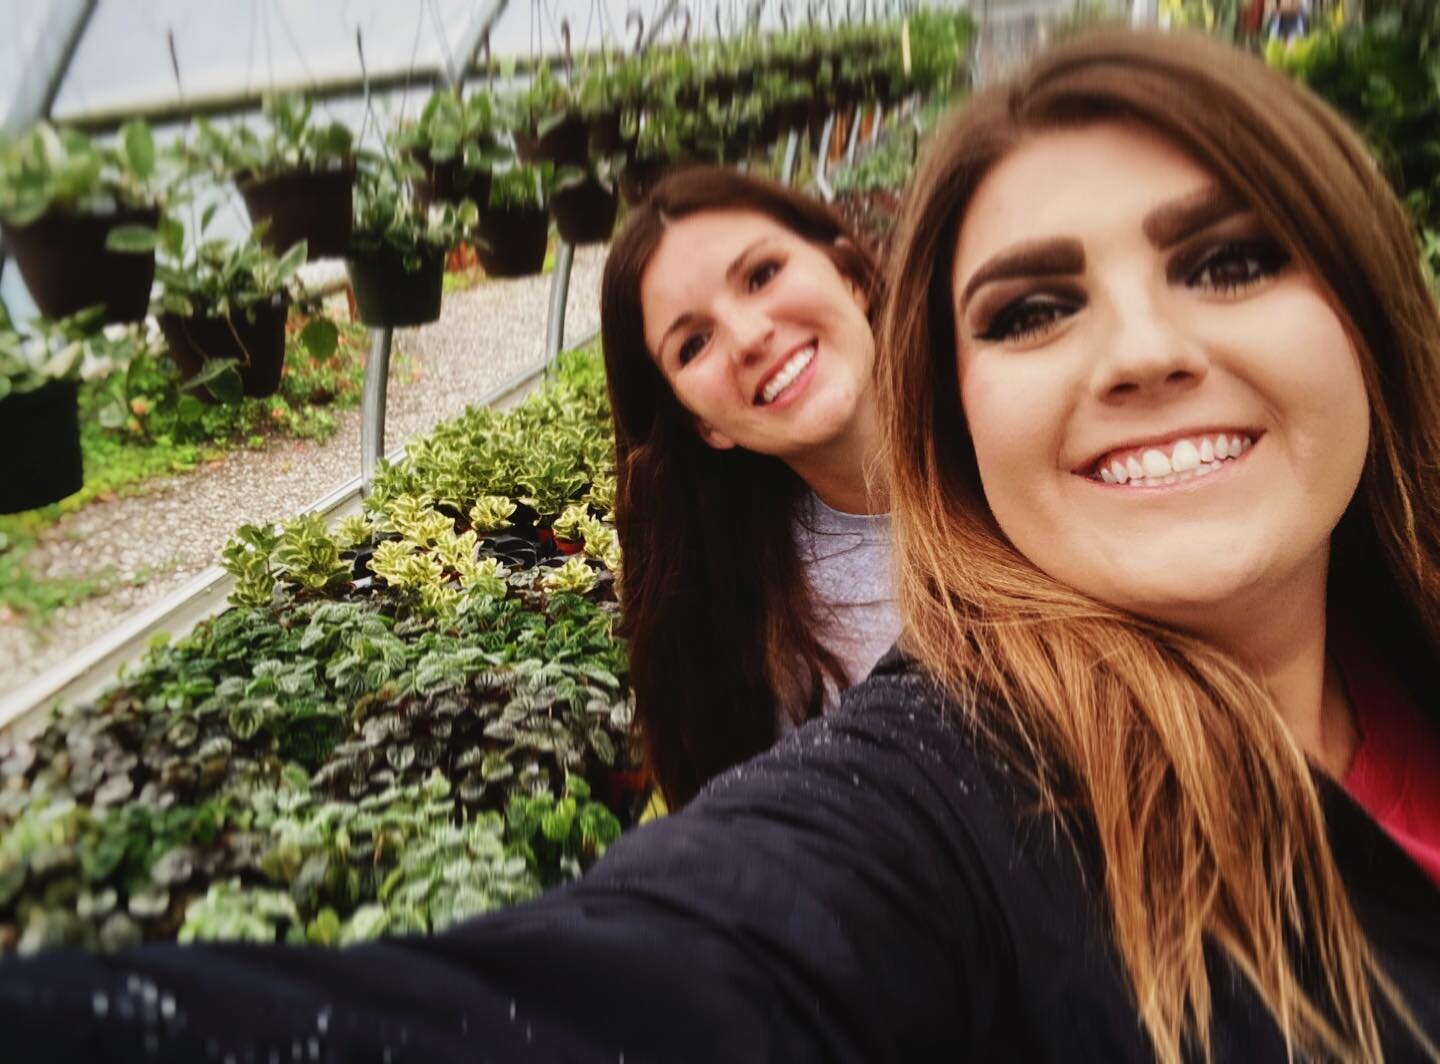 I have a sister, occasionally we get along. 😹
.
.
.
#sister #sisters #family #houseplants #houseplant #plants #green #flowers #selfie #roadtrip #columbus #ohio #hobby #whenimnottakingphotos  #dayoff #therapy #houseplanttherapy #greenhome #indoorgard